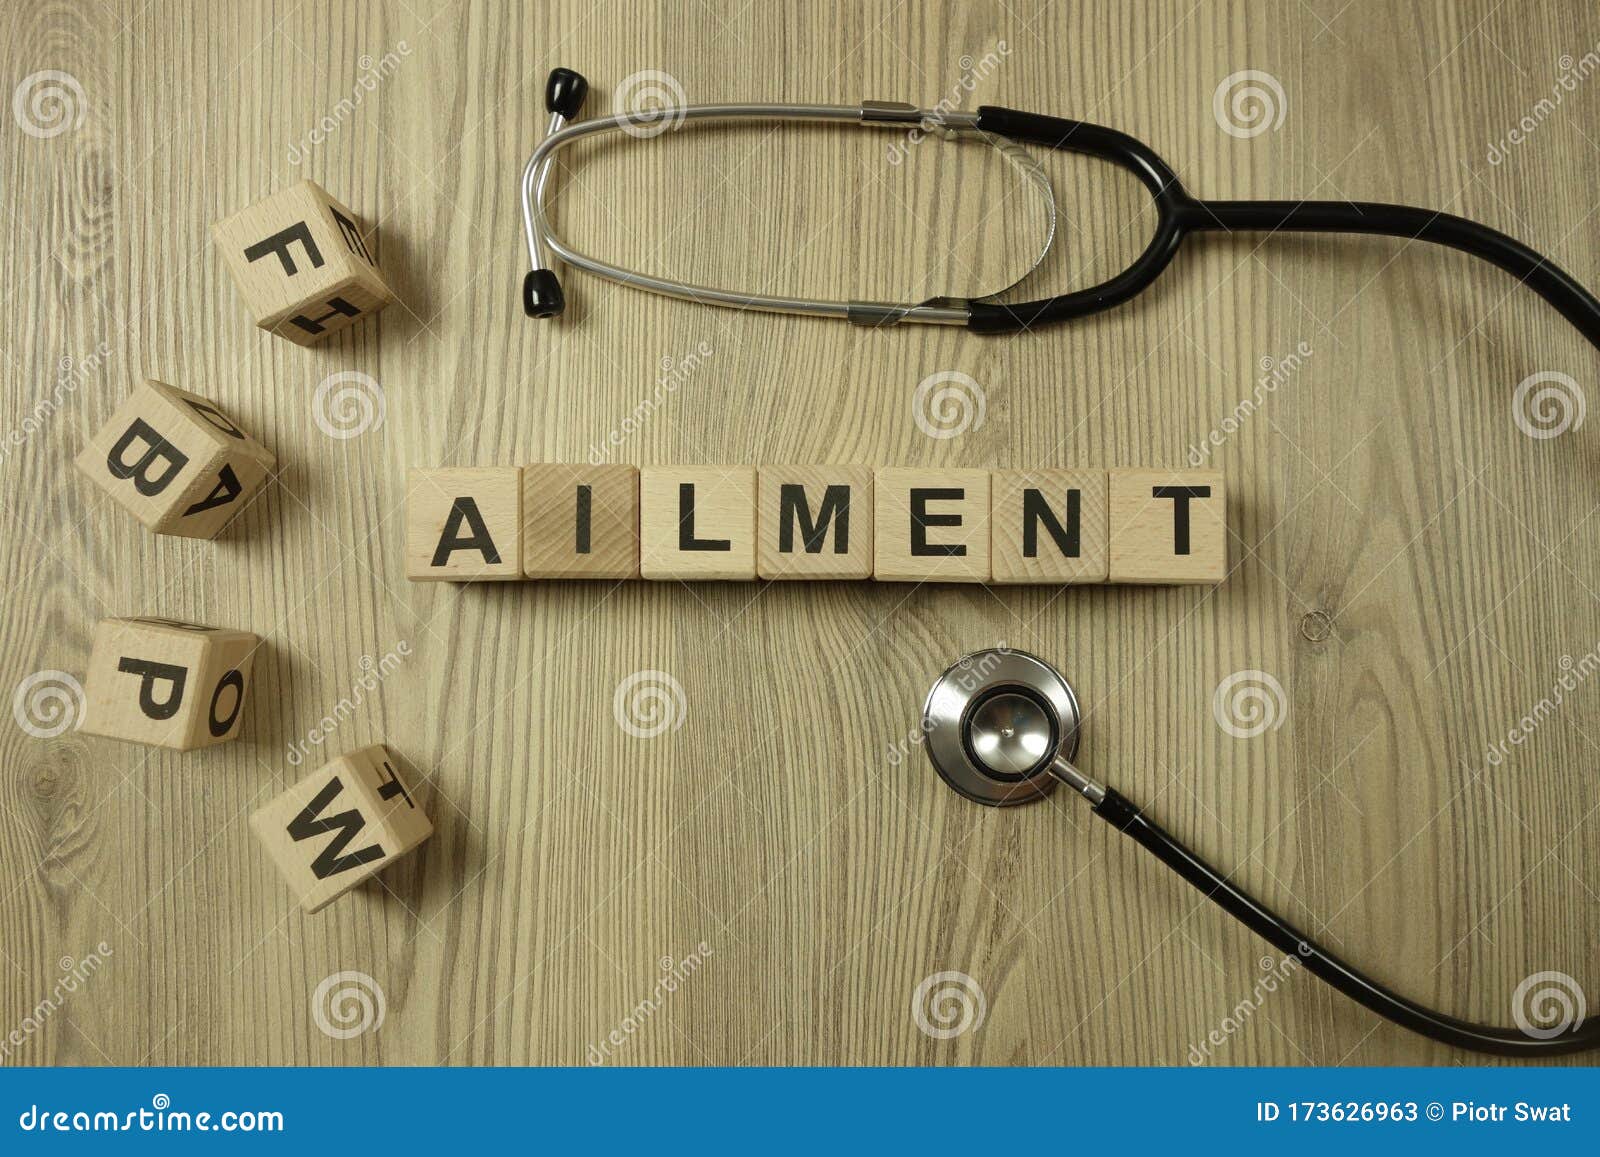 word ailment from wooden blocks with stethoscope